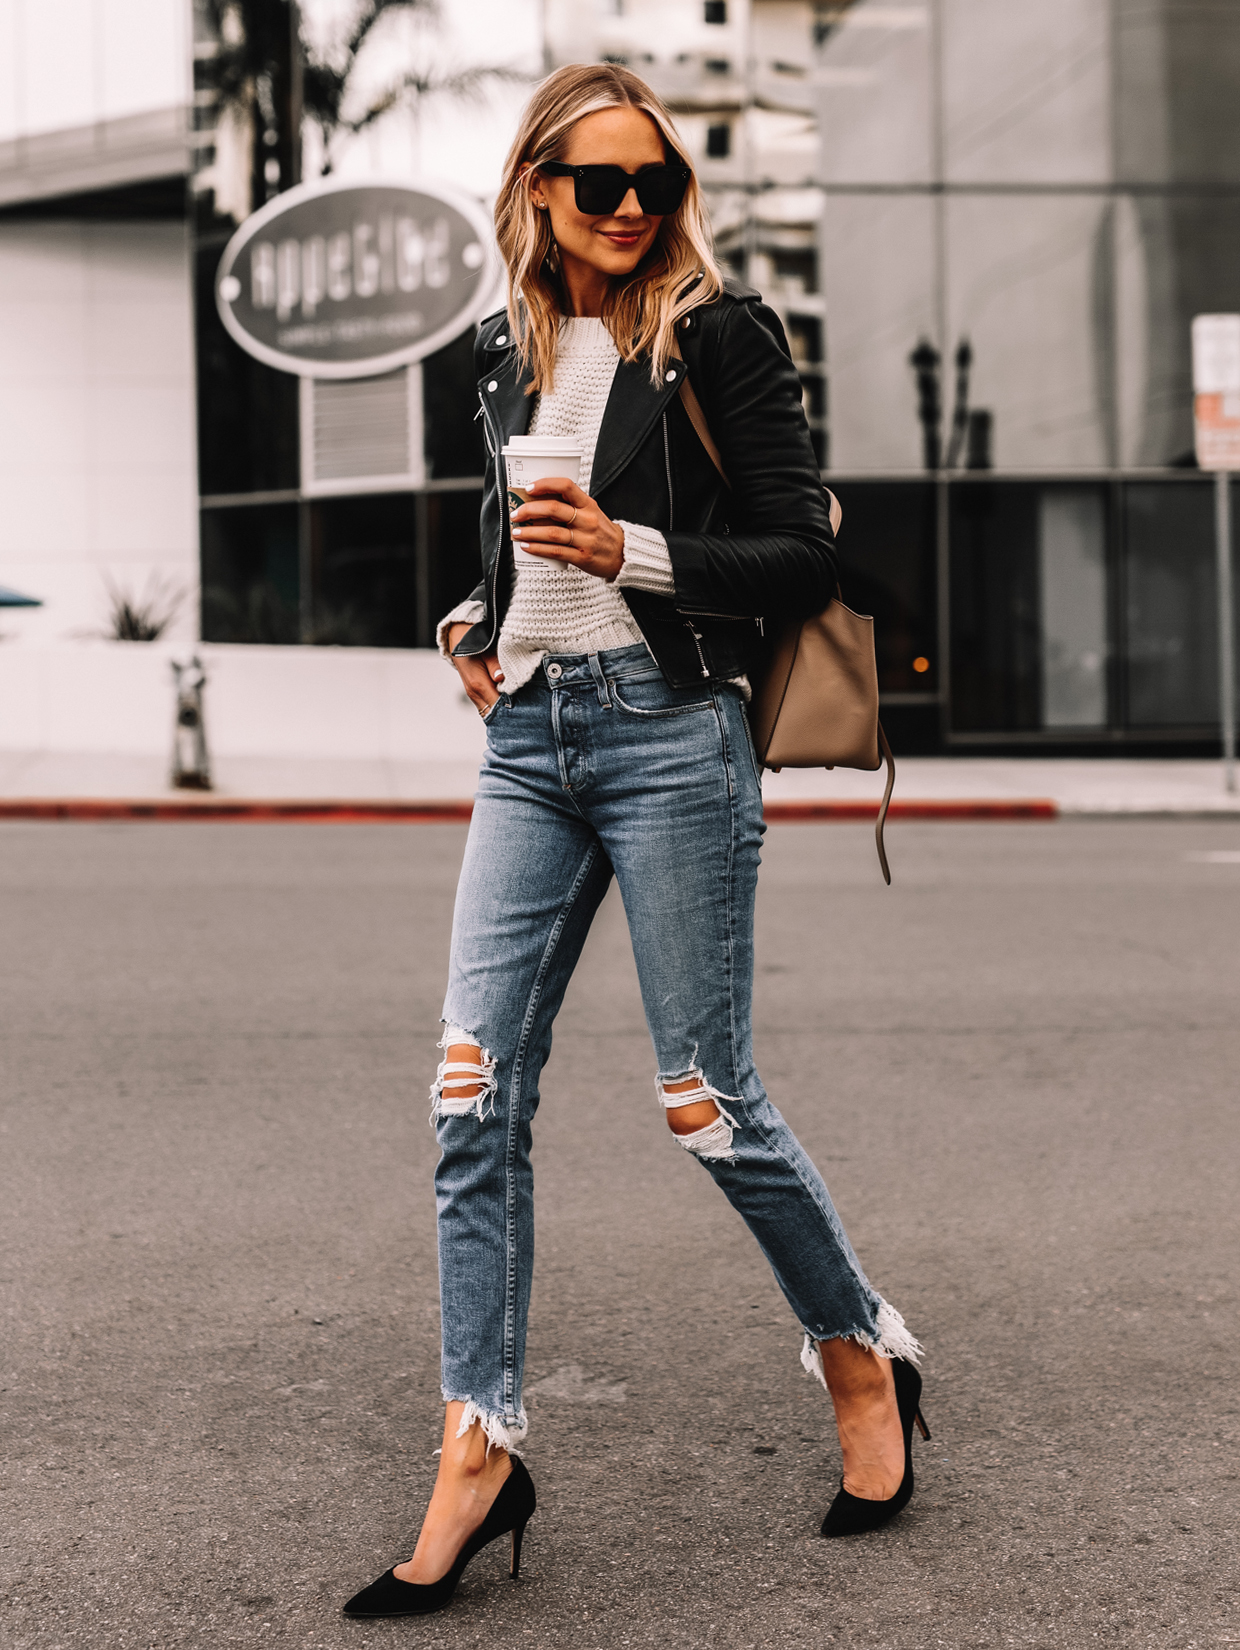 Fashion Jackson - My athleisure style always consists of leggings,  sneakers, and mixing in a few ready-to-wear items, and lately I've been  finding some of the best athleisure styles on  Fashion.